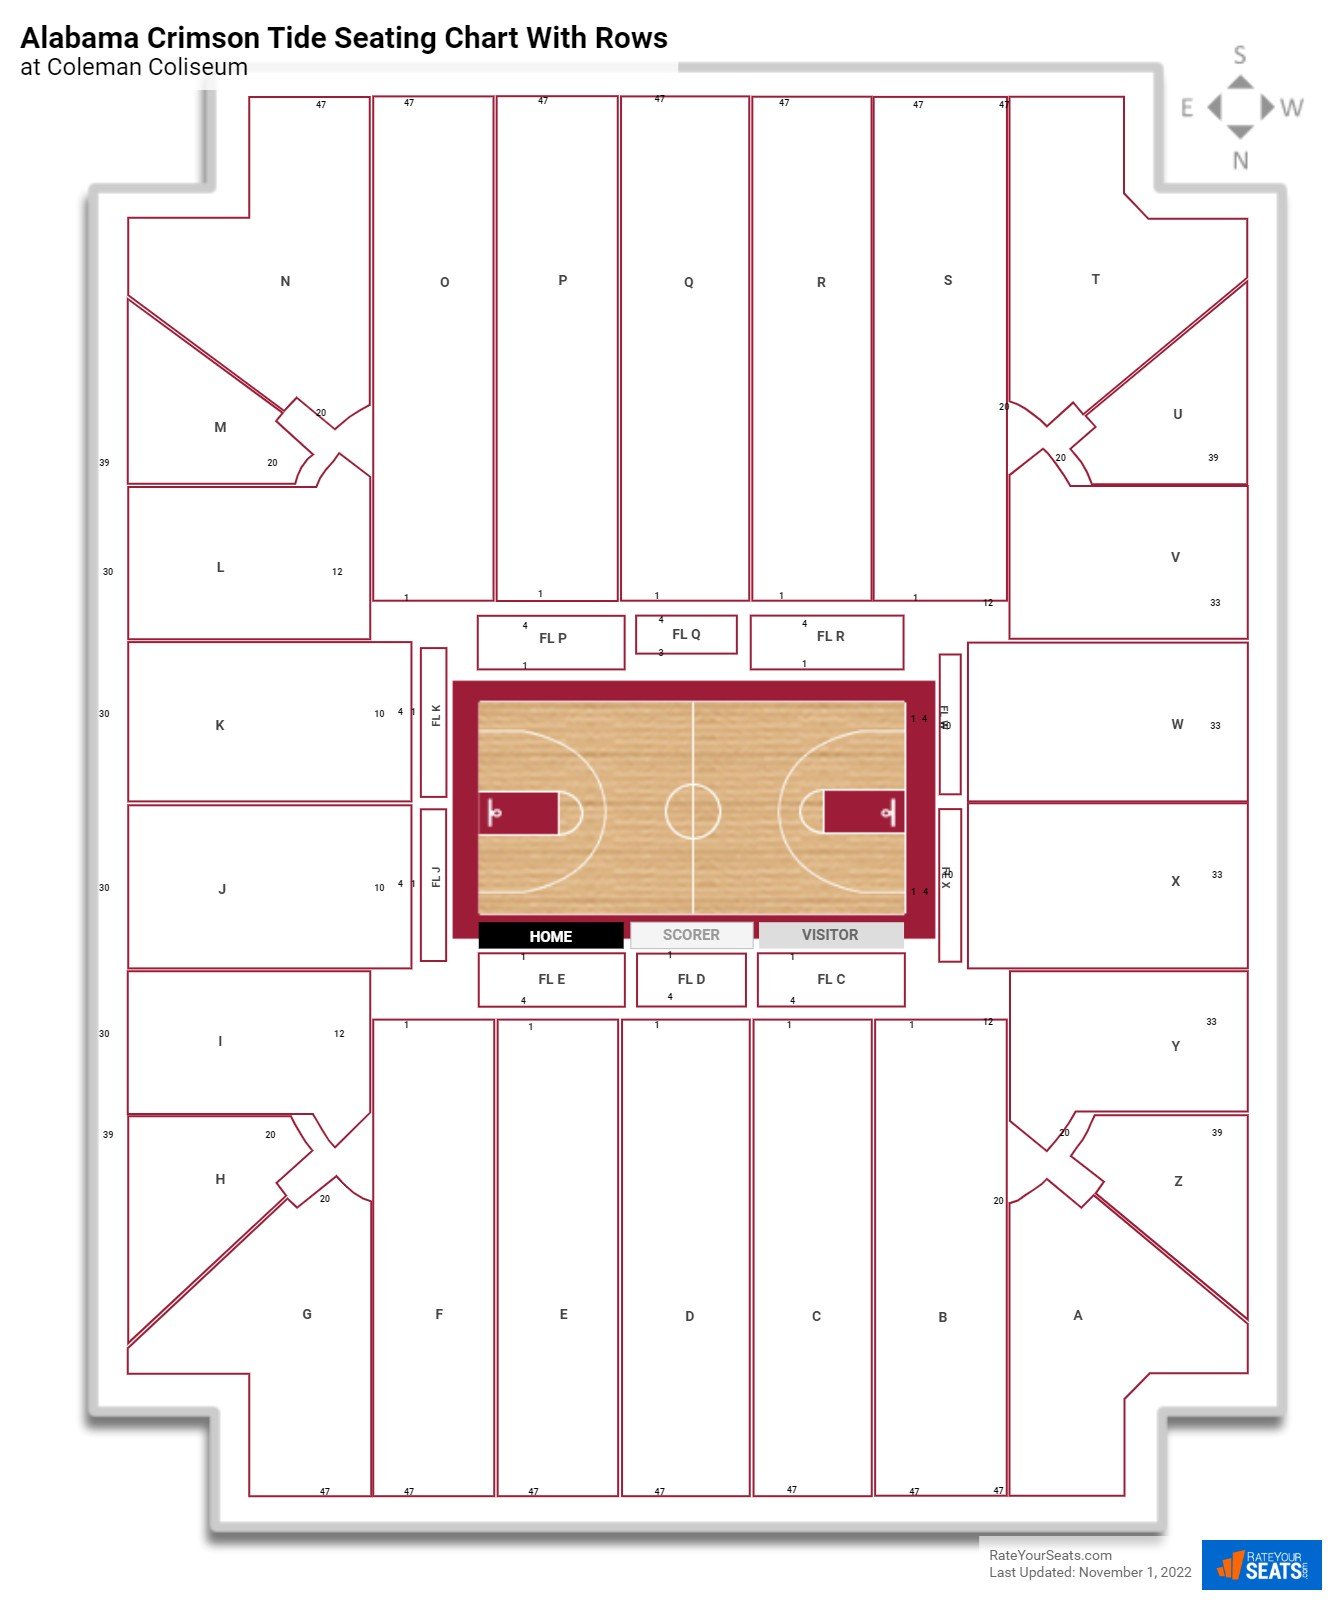 Coleman Coliseum seating chart with row numbers